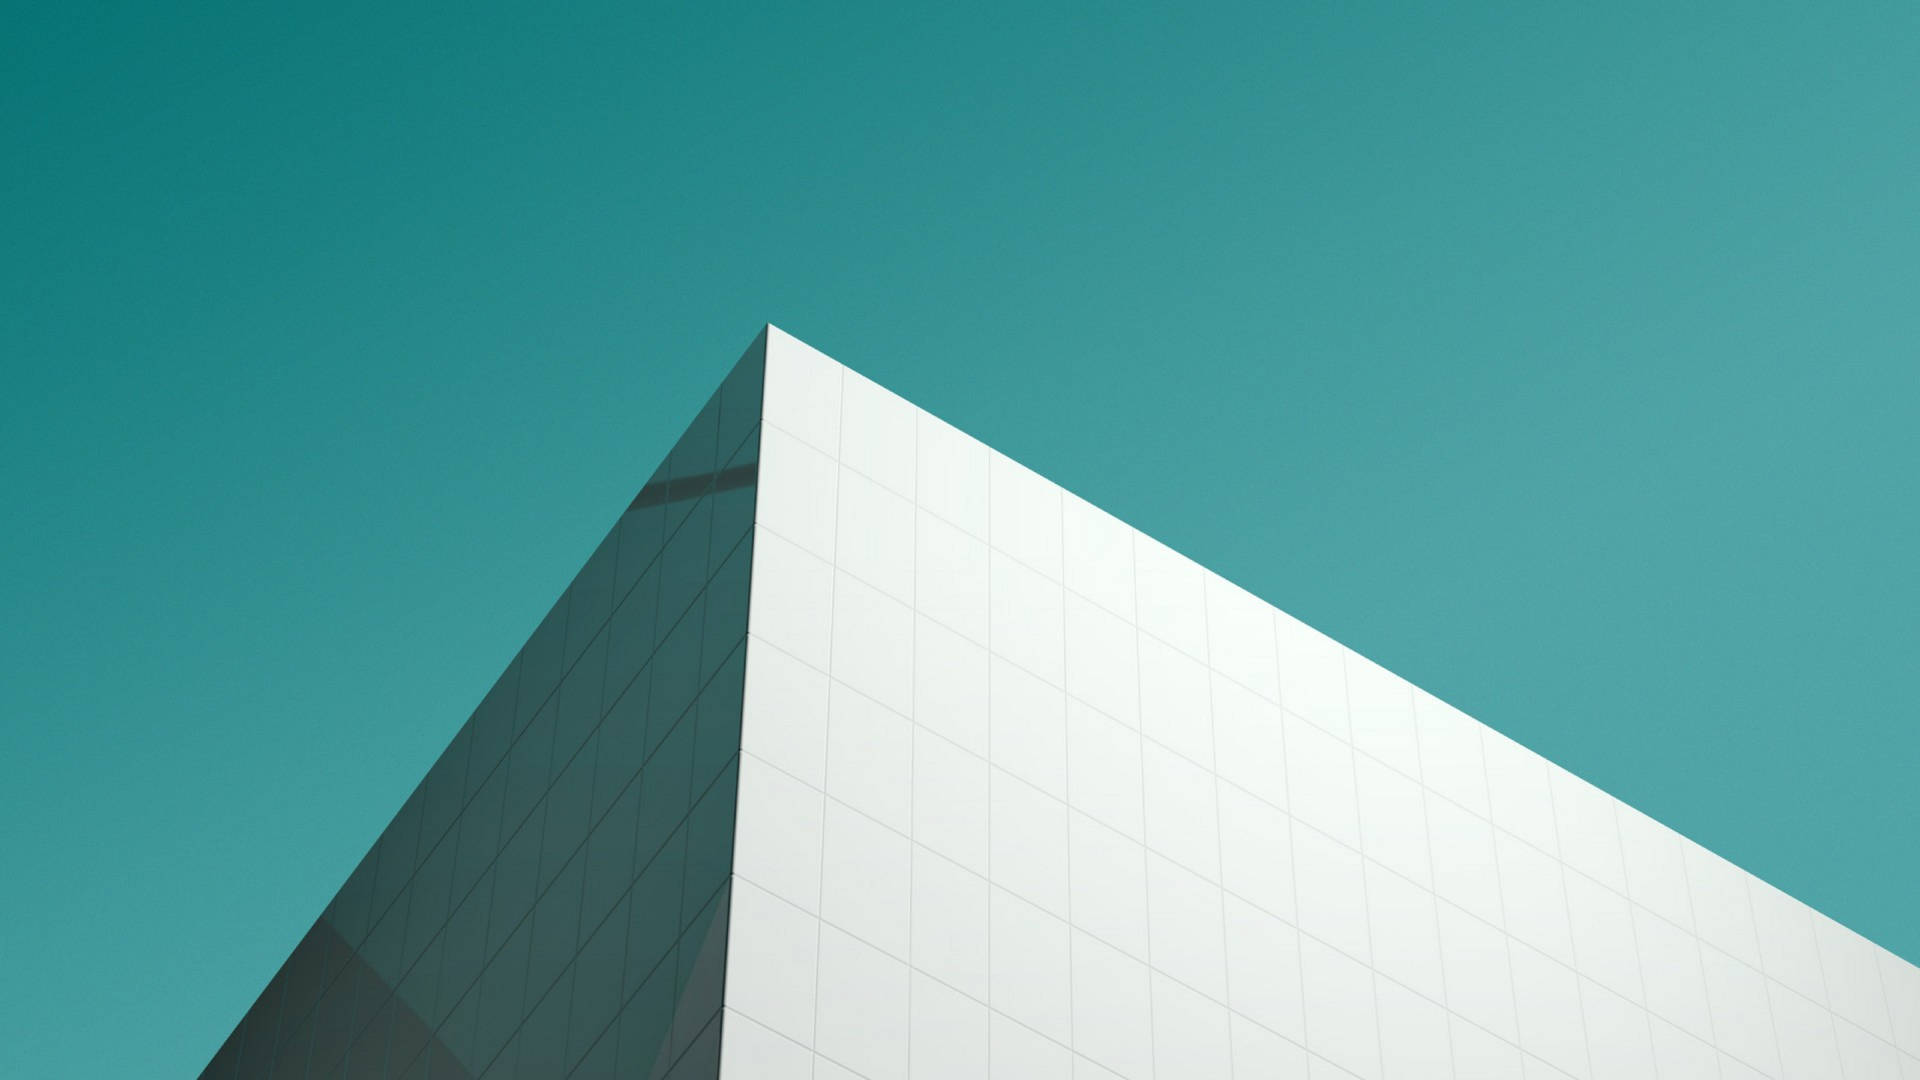 Architecture wallpapers of all shapes and sizes for iPhone